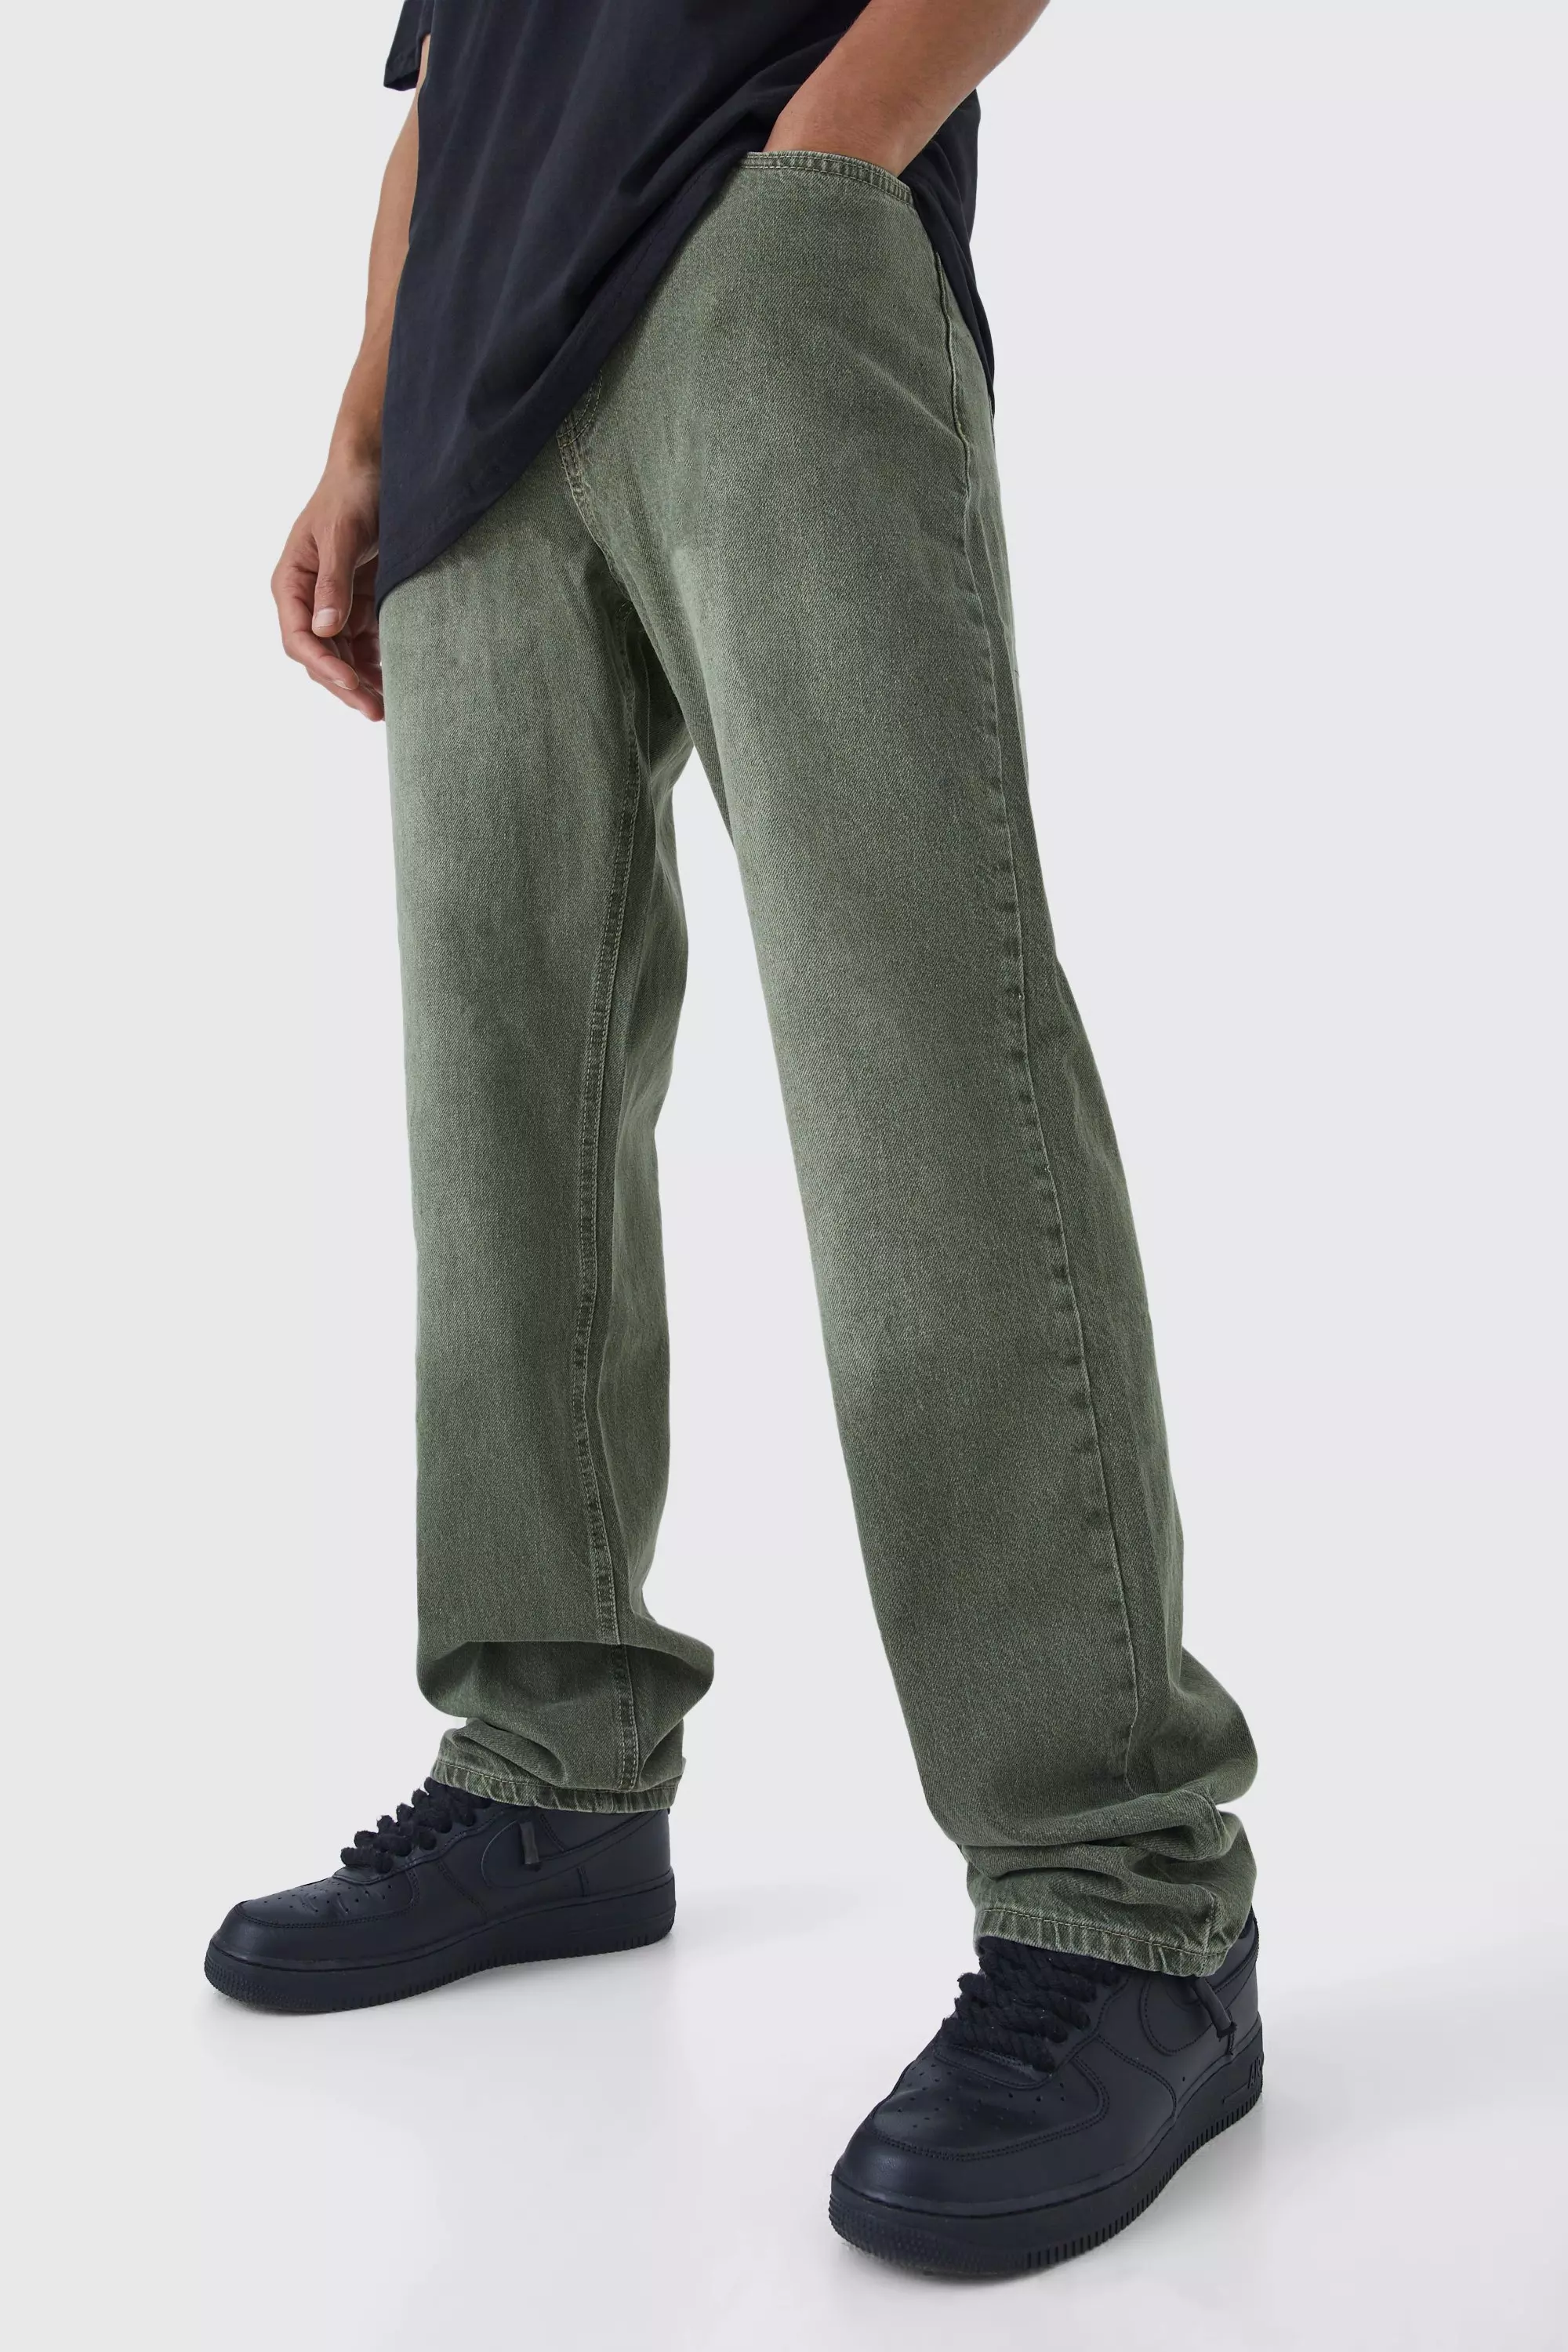 Sage Green Tall Relaxed Rigid Overdye Embossed Jean